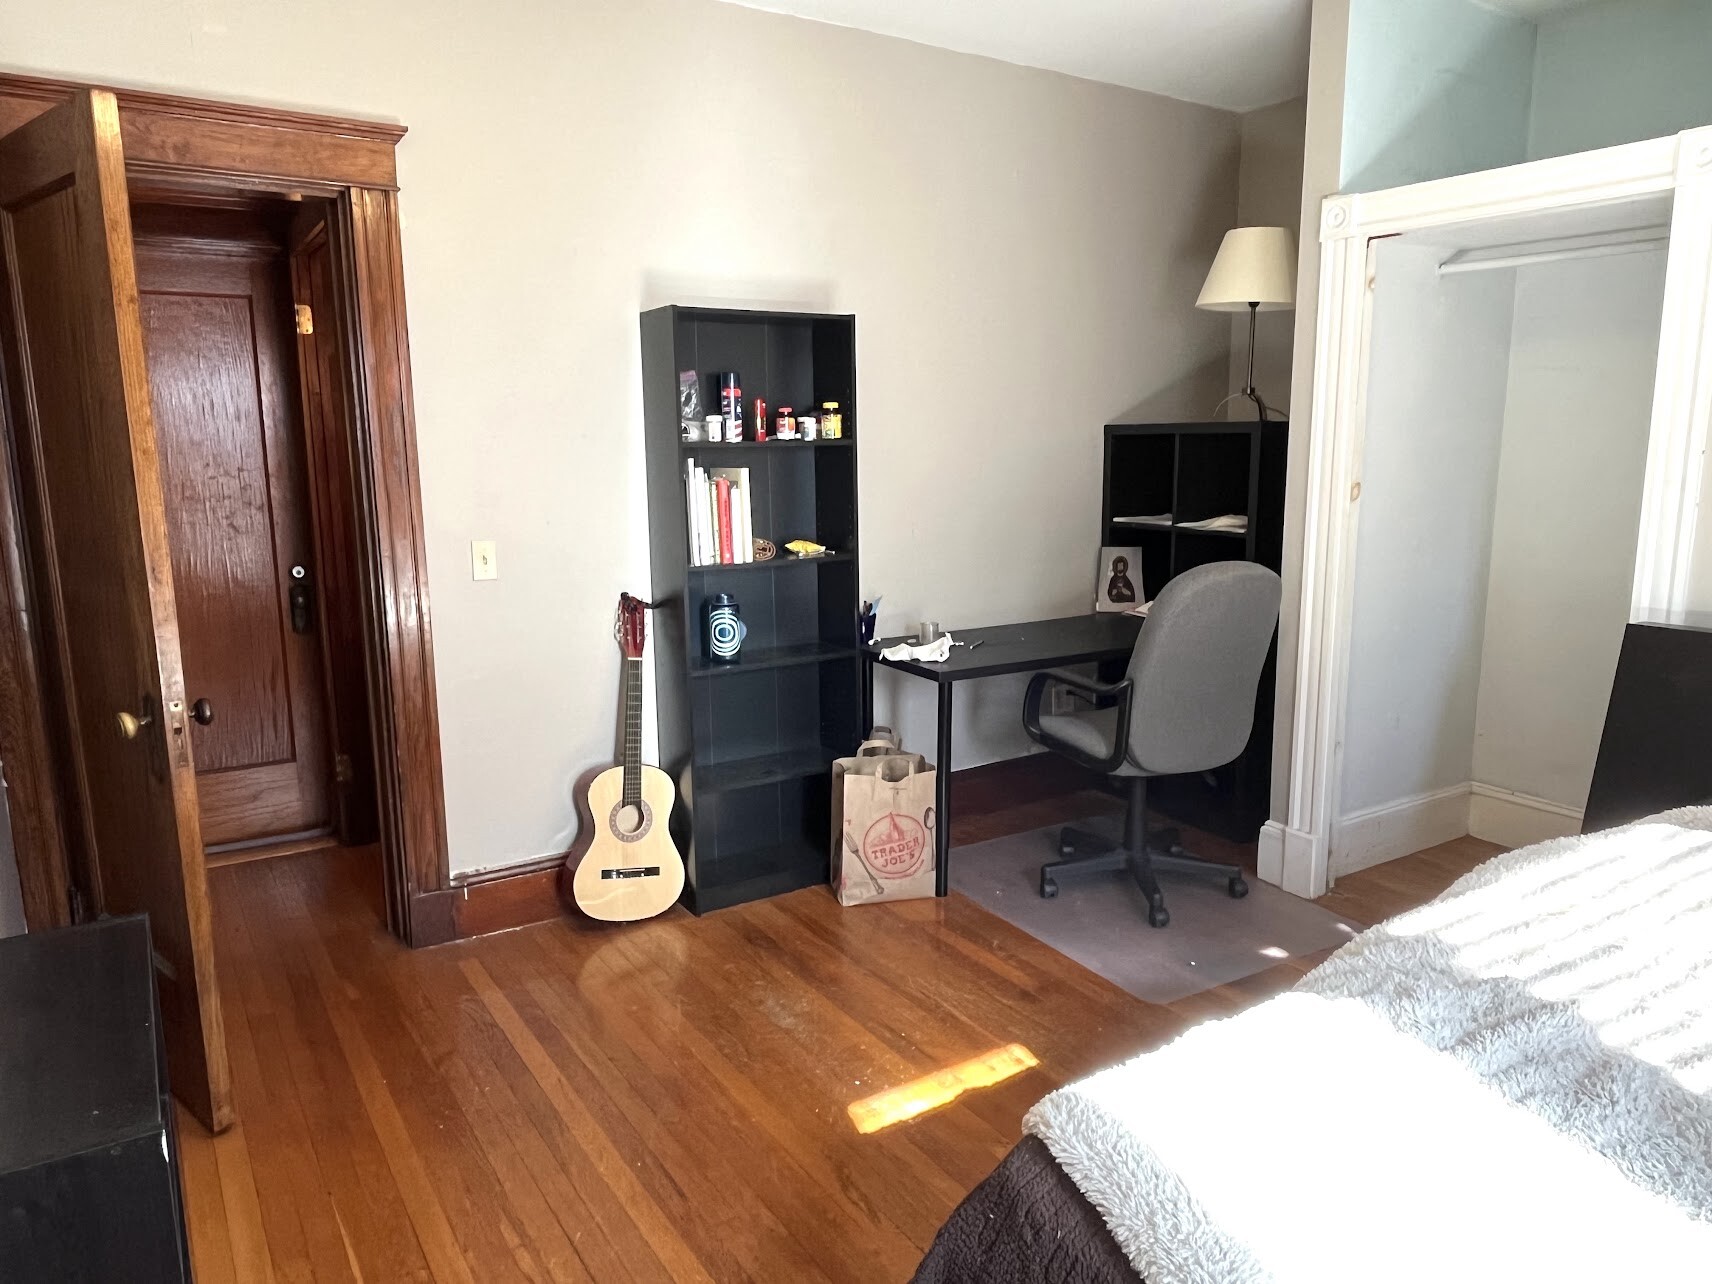 Photos of apartment on School St.,Watertown MA 02472